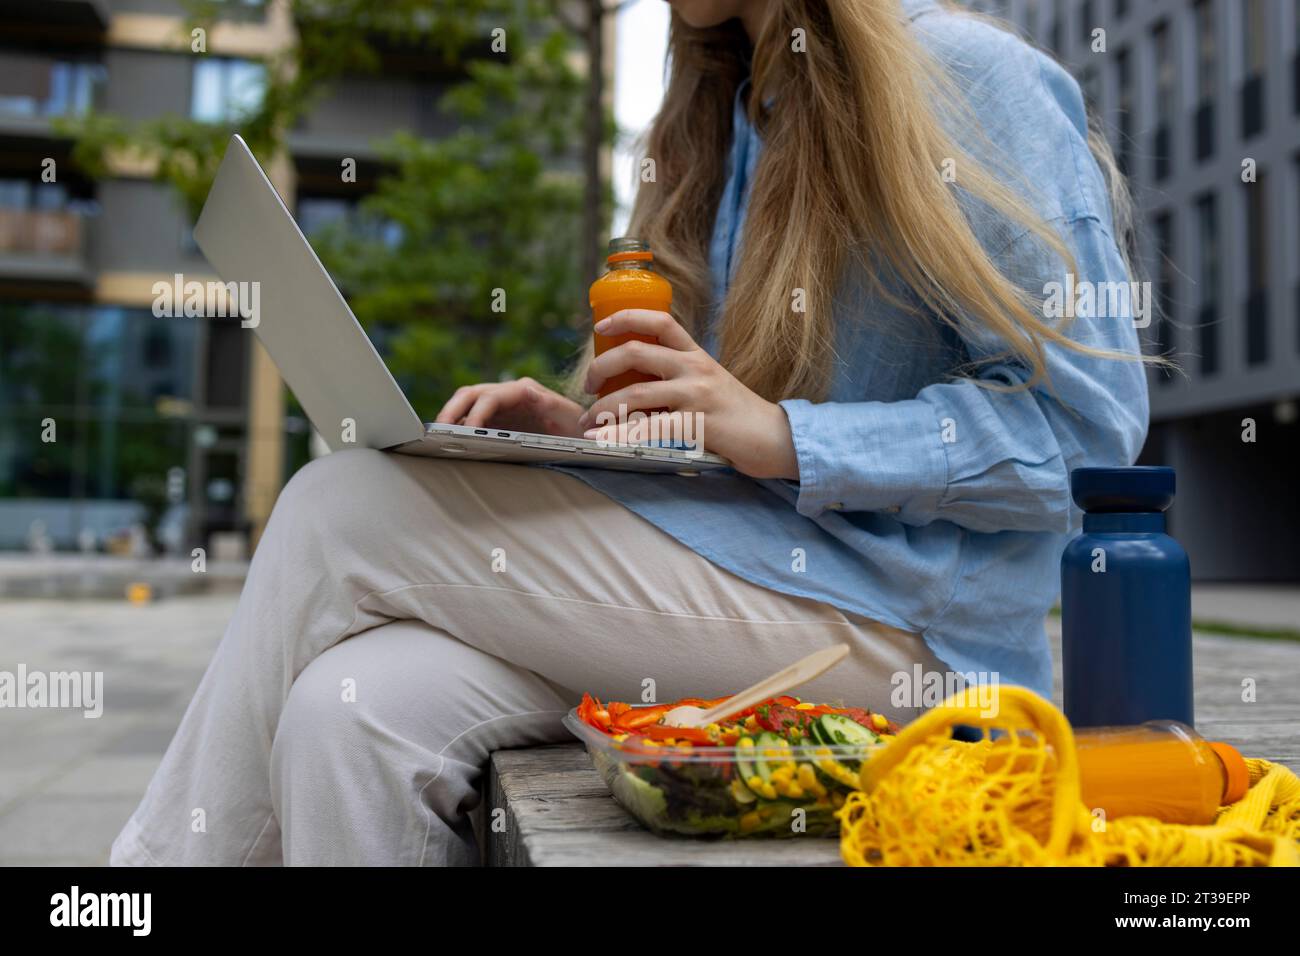 Anonymous blond haired student taking a break and writing in her laptop in an urban place. Low-angle view. Stock Photo